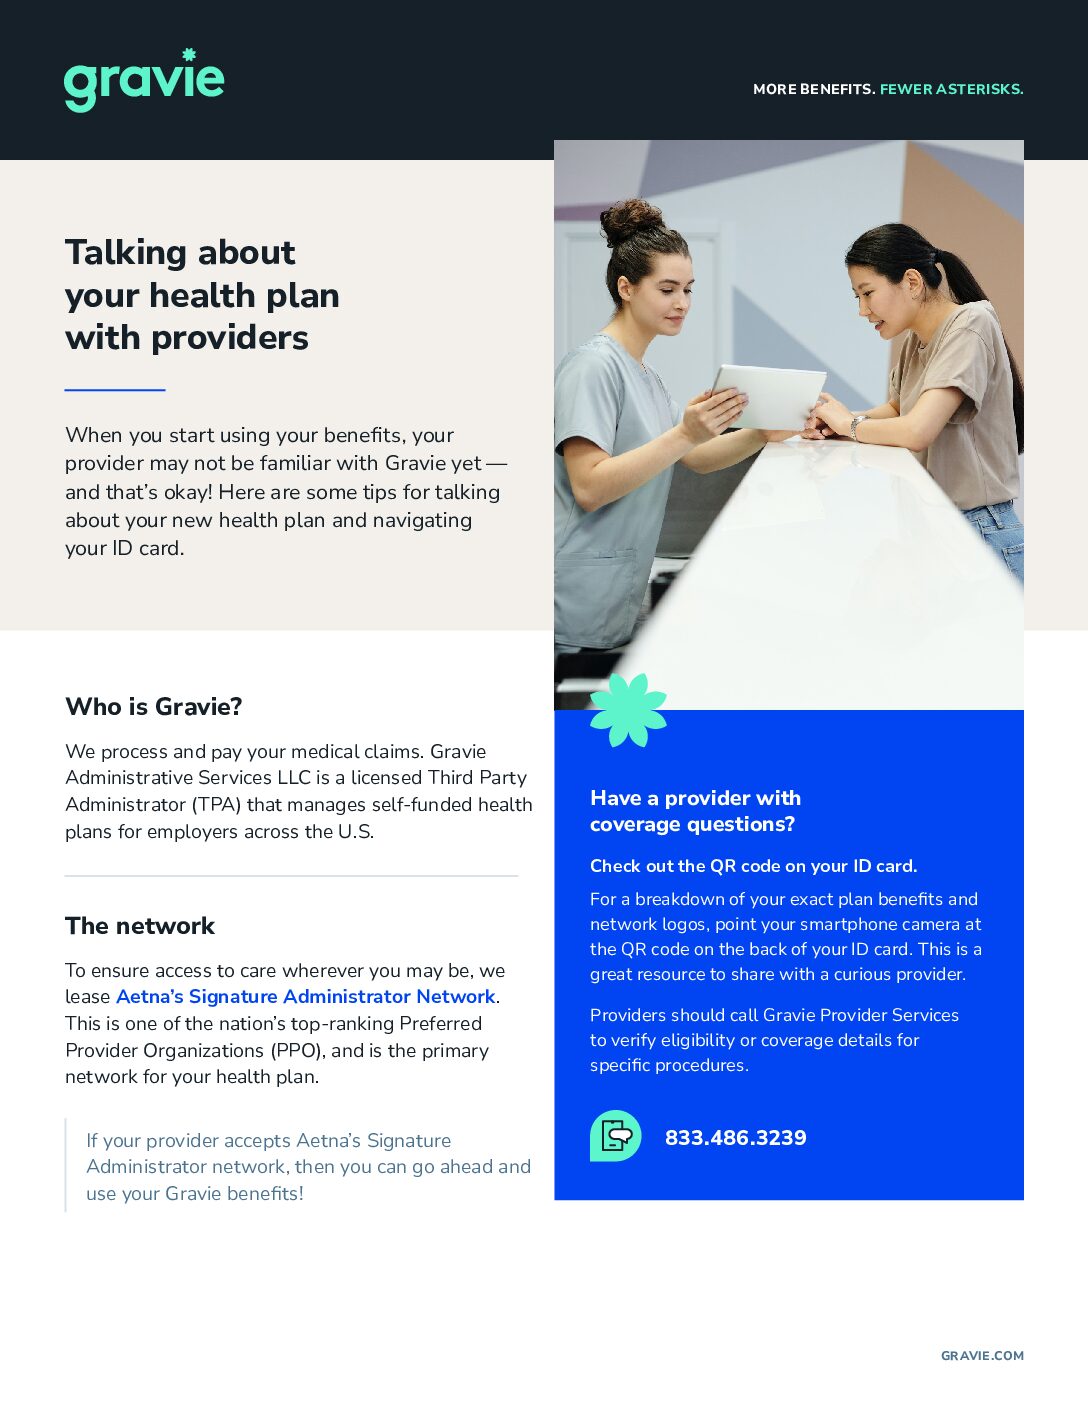 Gravie Aetna: Talking About Your Health Plan With Providers